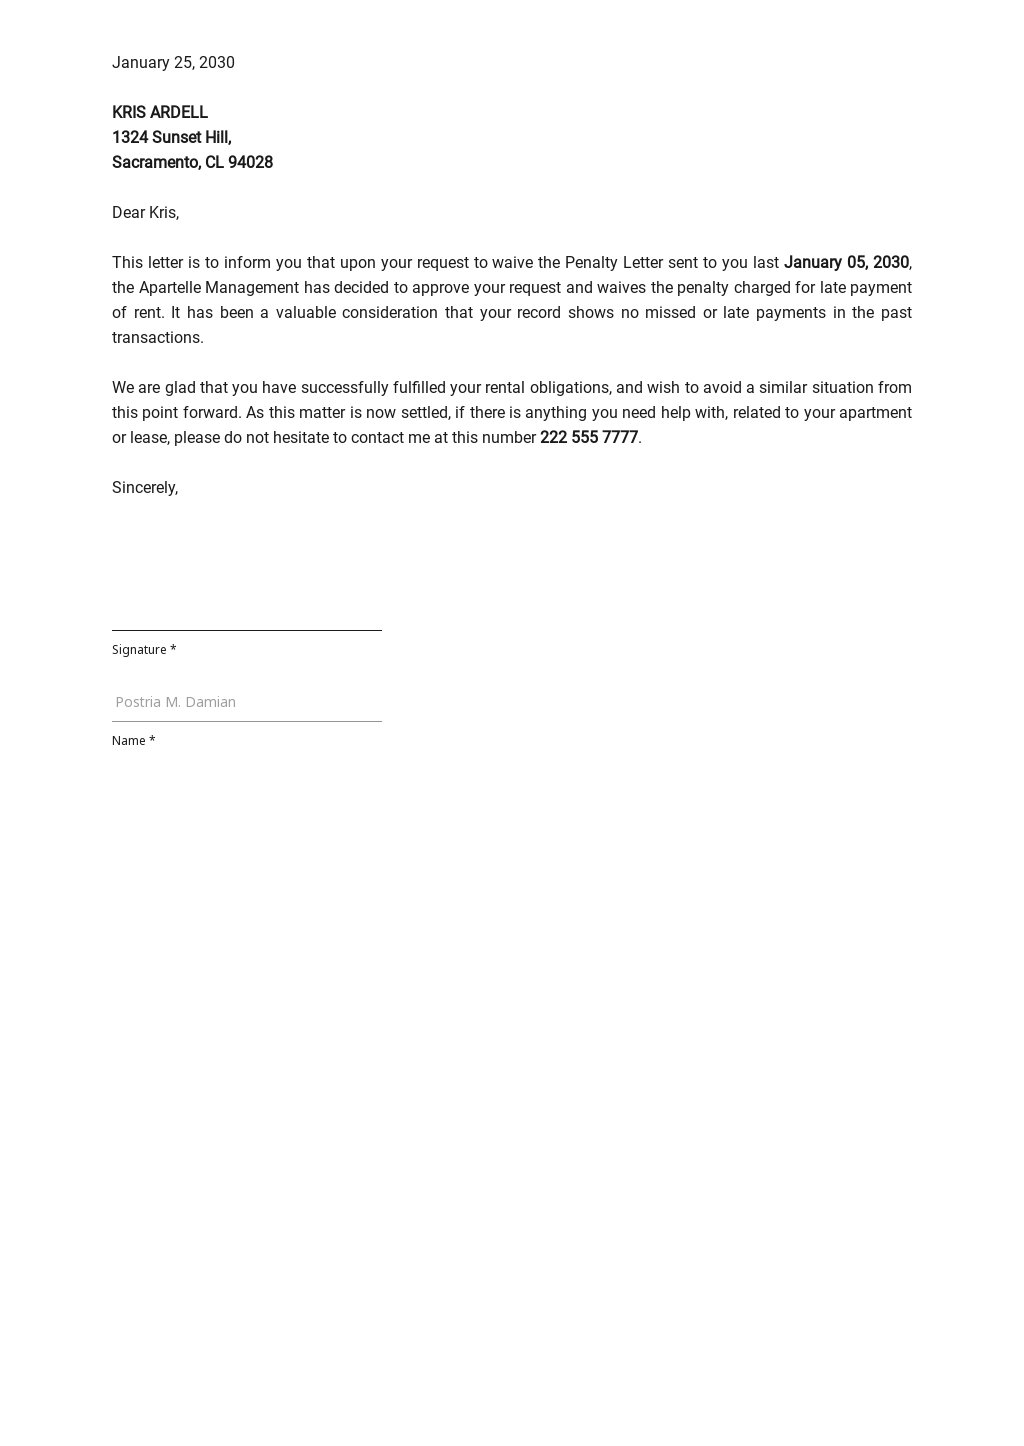 Waiver of Penalty Letter Template in Google Docs, Word